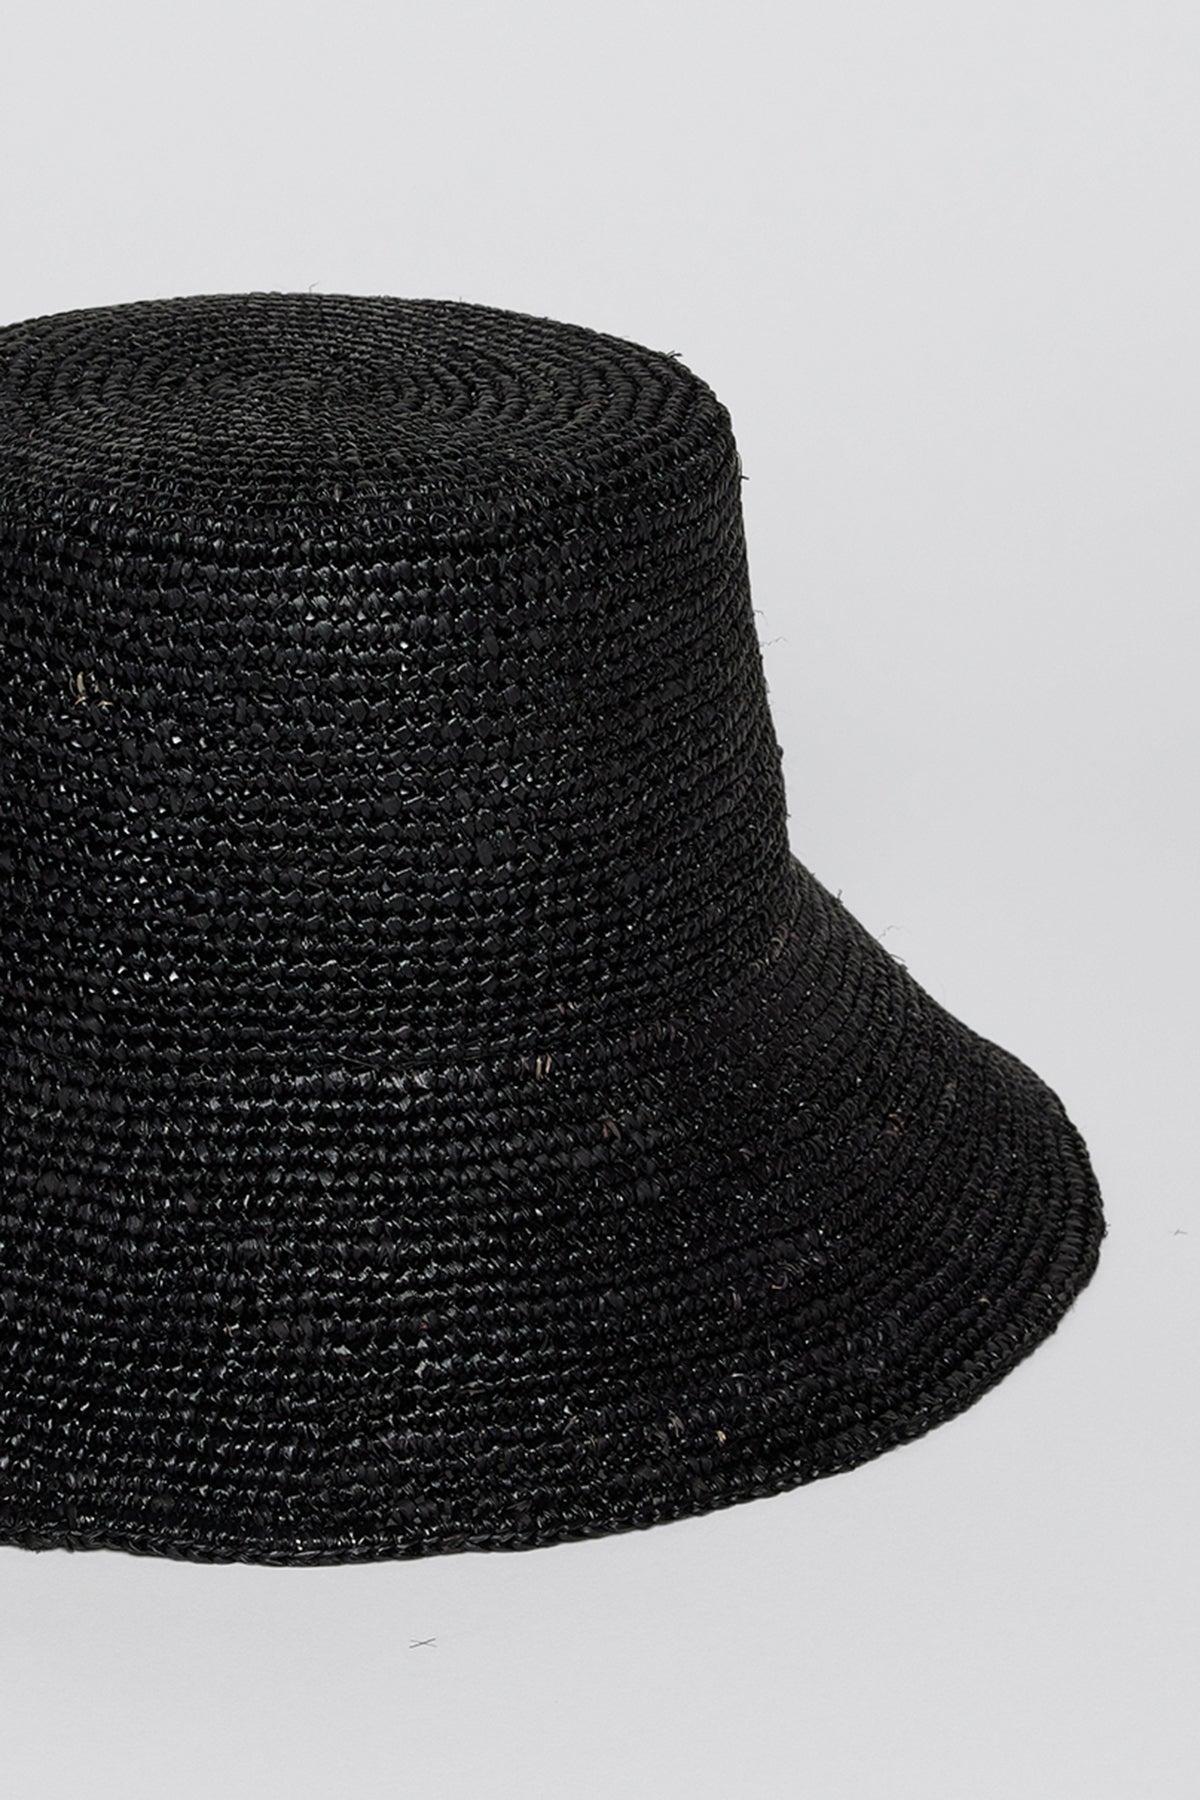   Velvet by Graham & Spencer CHIC CROCHET BUCKET HAT with a textured weave design, isolated on a light gray background. 